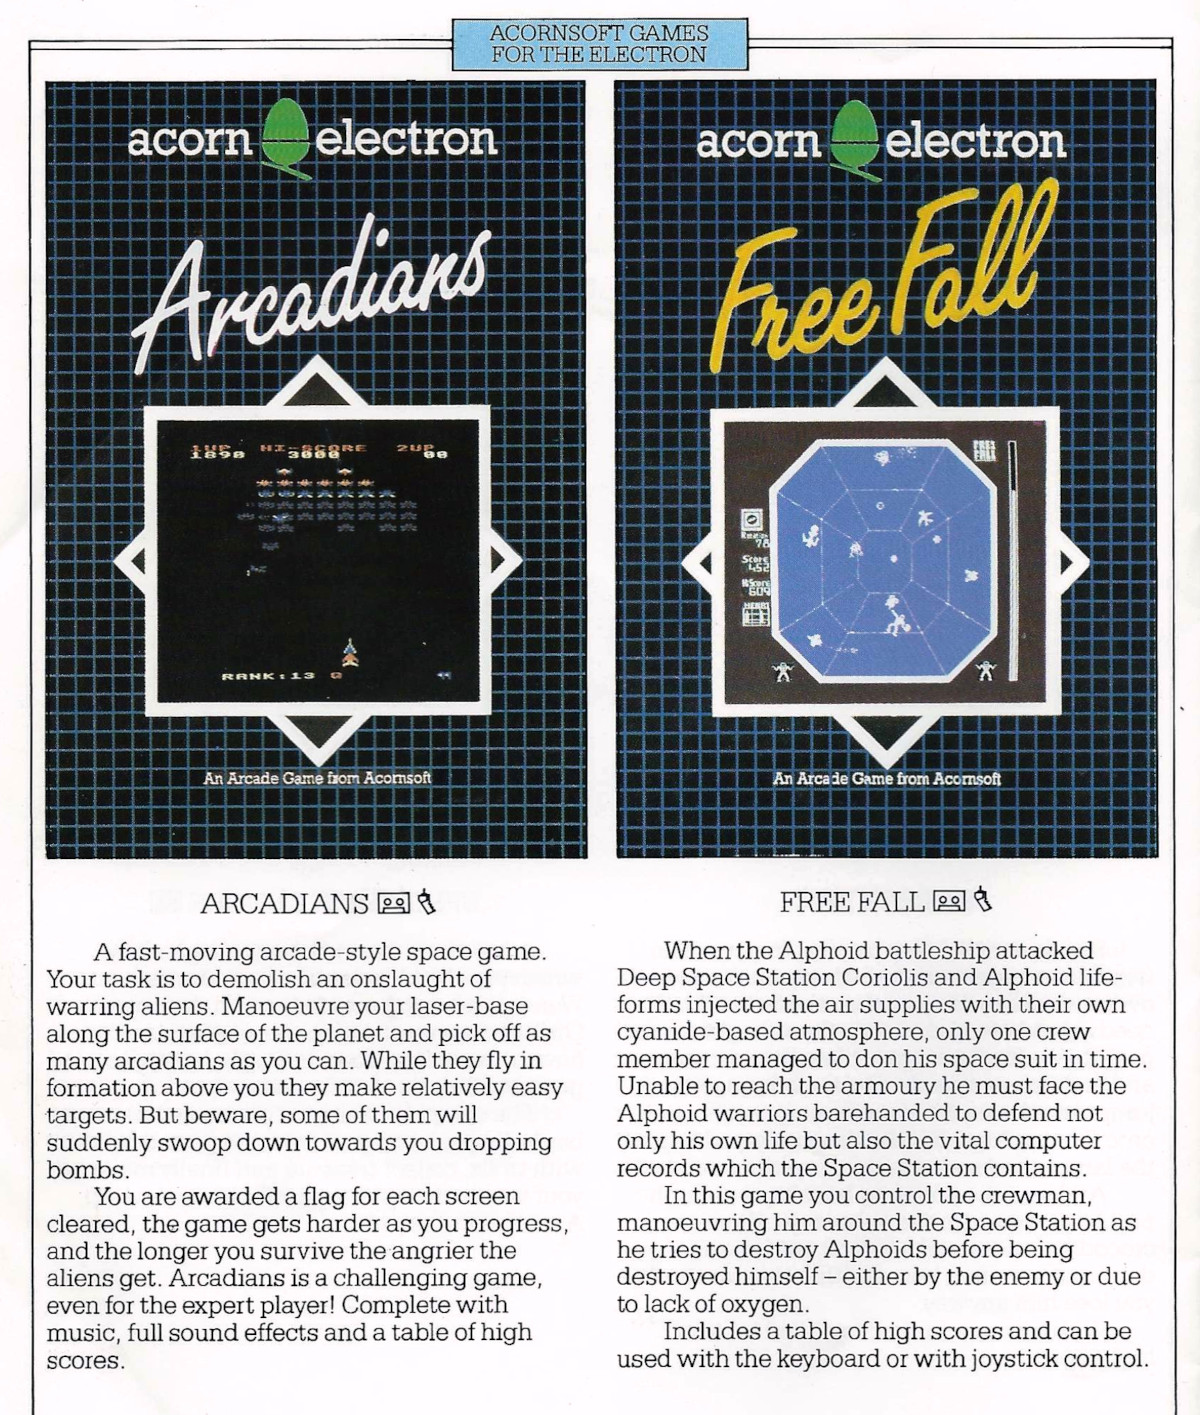 Part of a sales brochure for Acornsoft showing Freefall for the Acorn Electron - the 